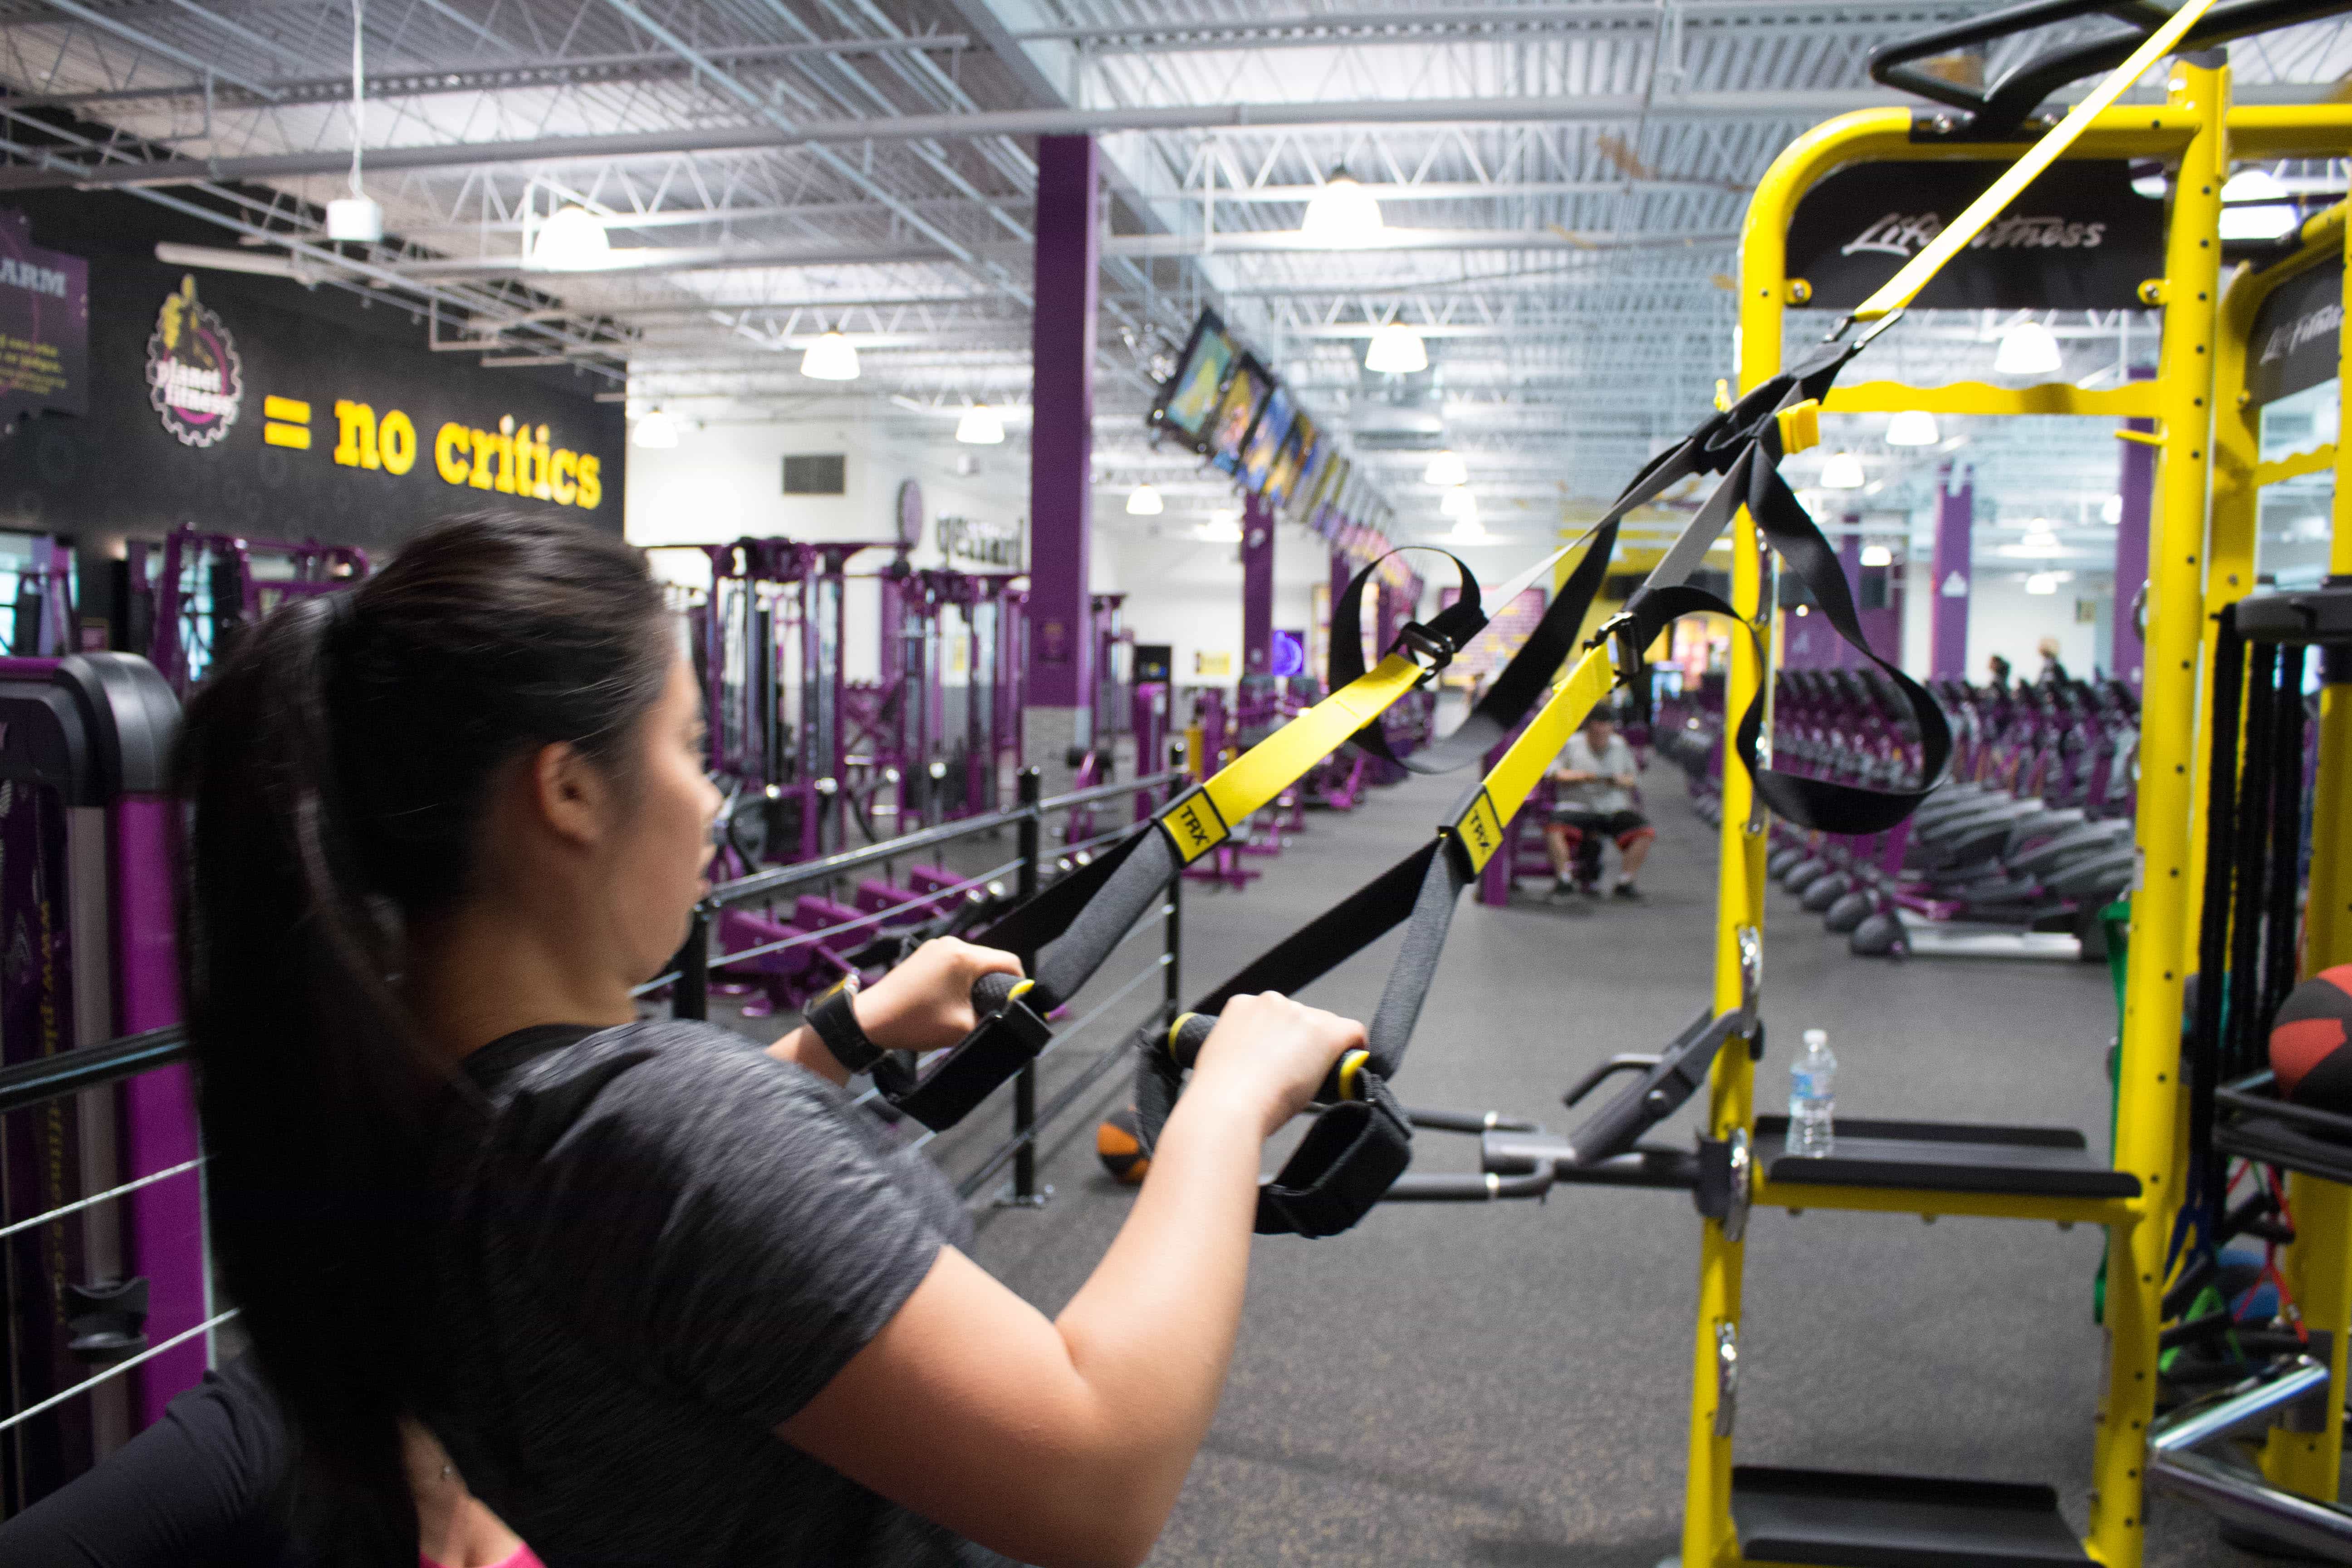 Introducing Planet Fitness. No Frills, No Judgement, Low Cost Gym at